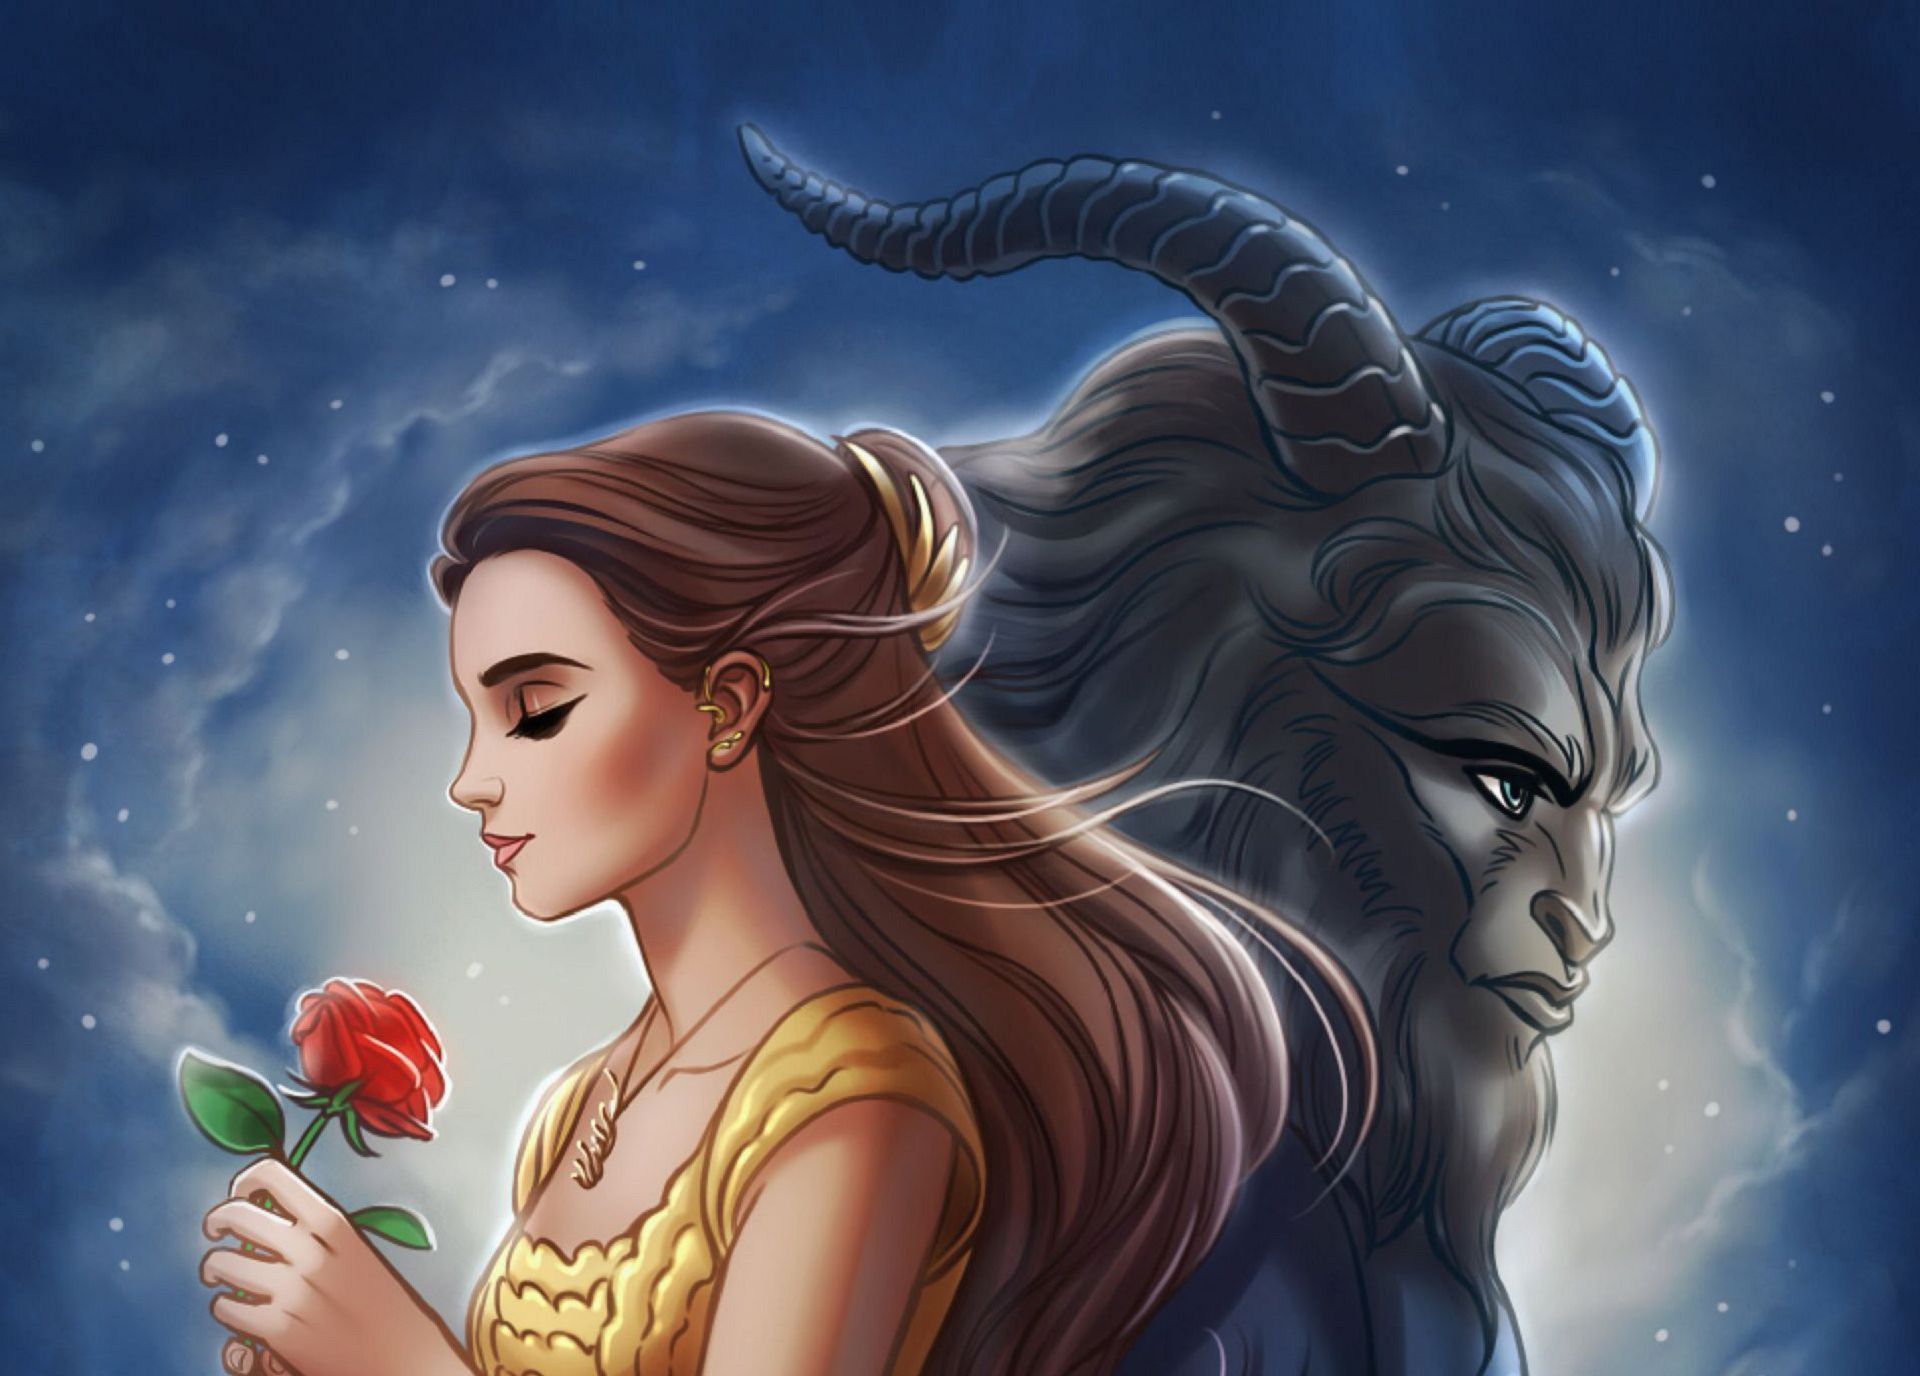 Beauty and the Beast Wallpapers 4k, HD Beauty and the Beast